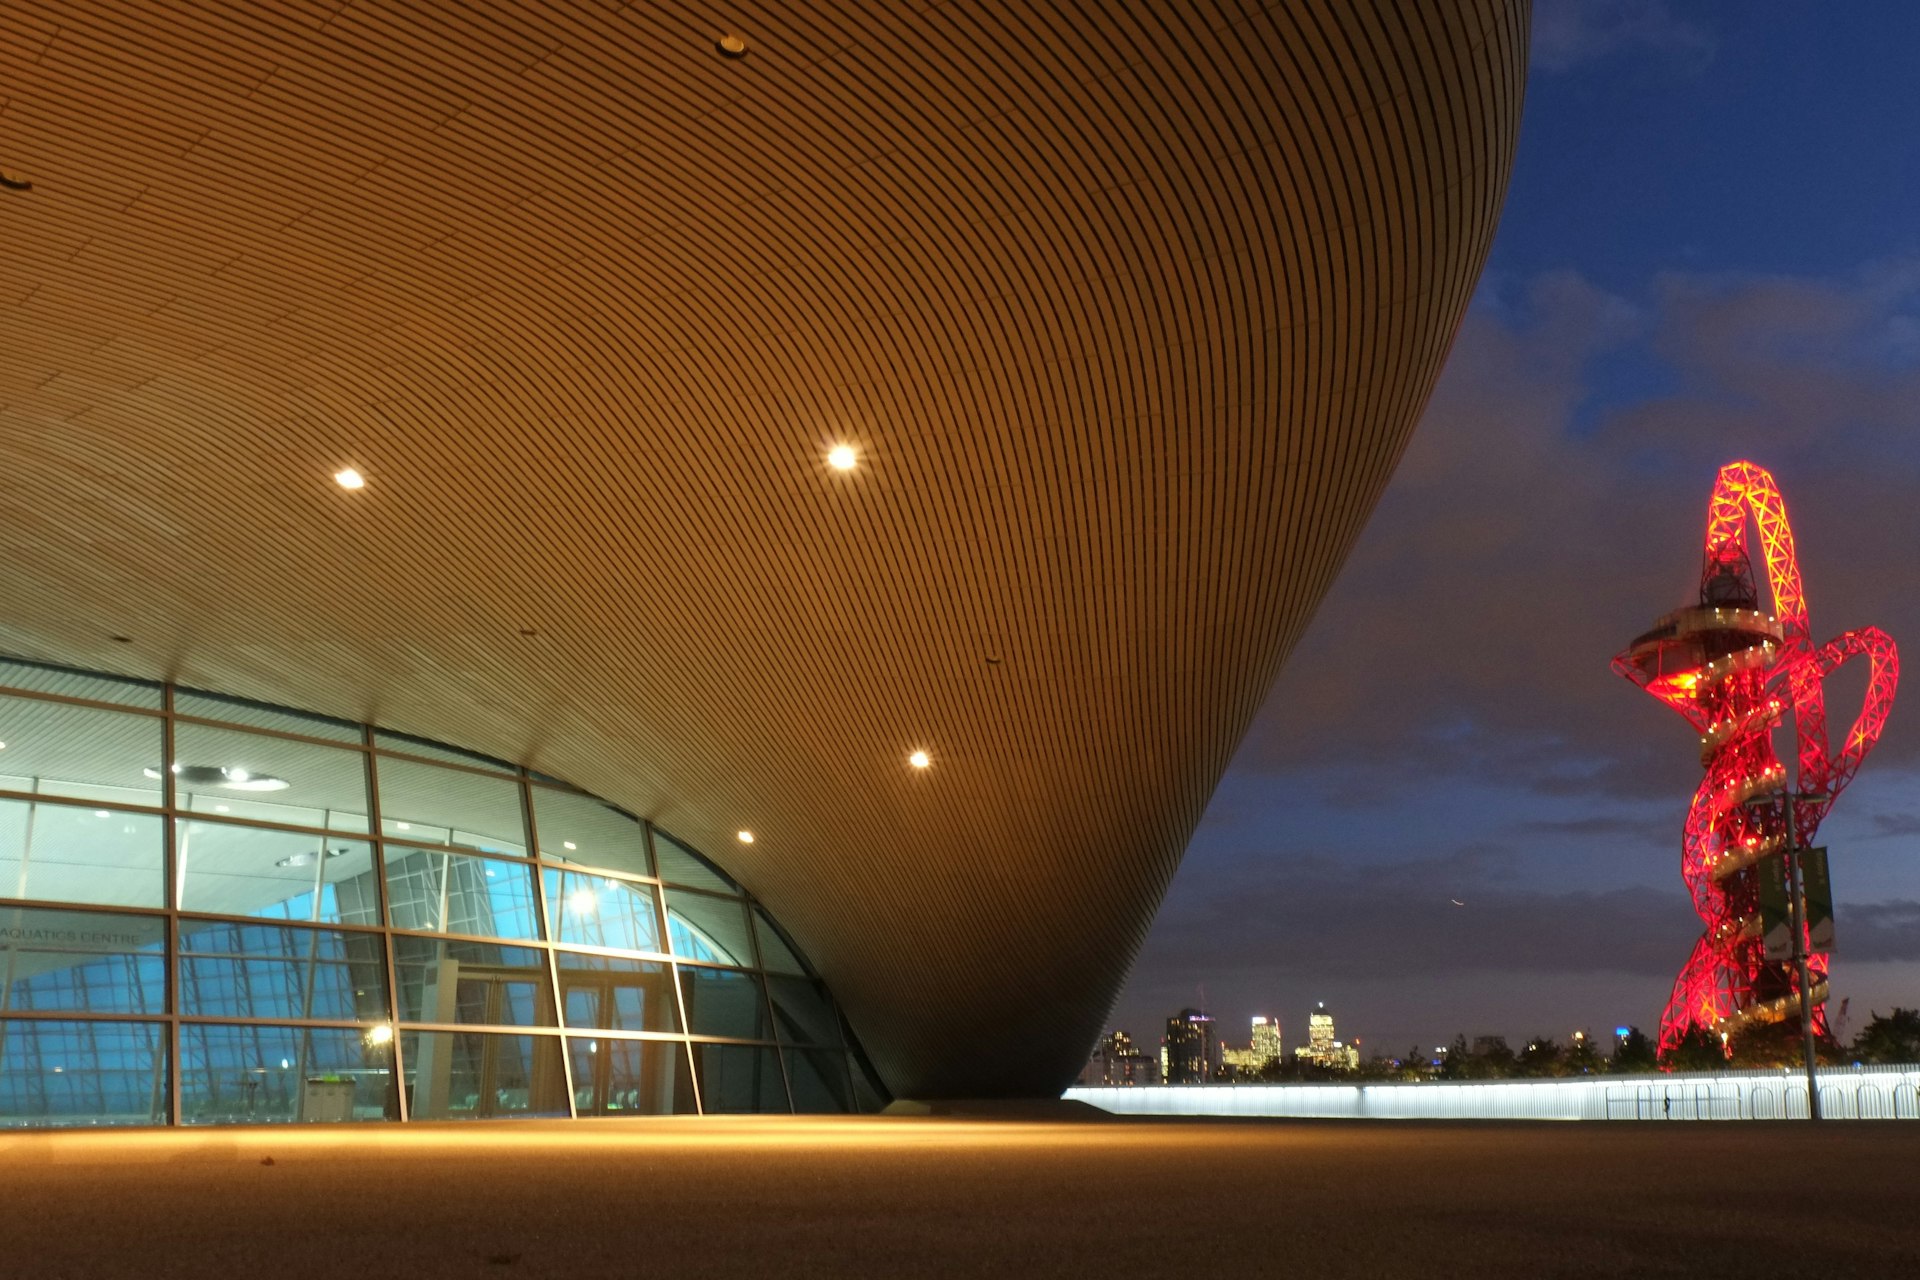 The London Aquatics Centre: perfect for an early morning dip. Image by Sally Schafer / Lonely Planet